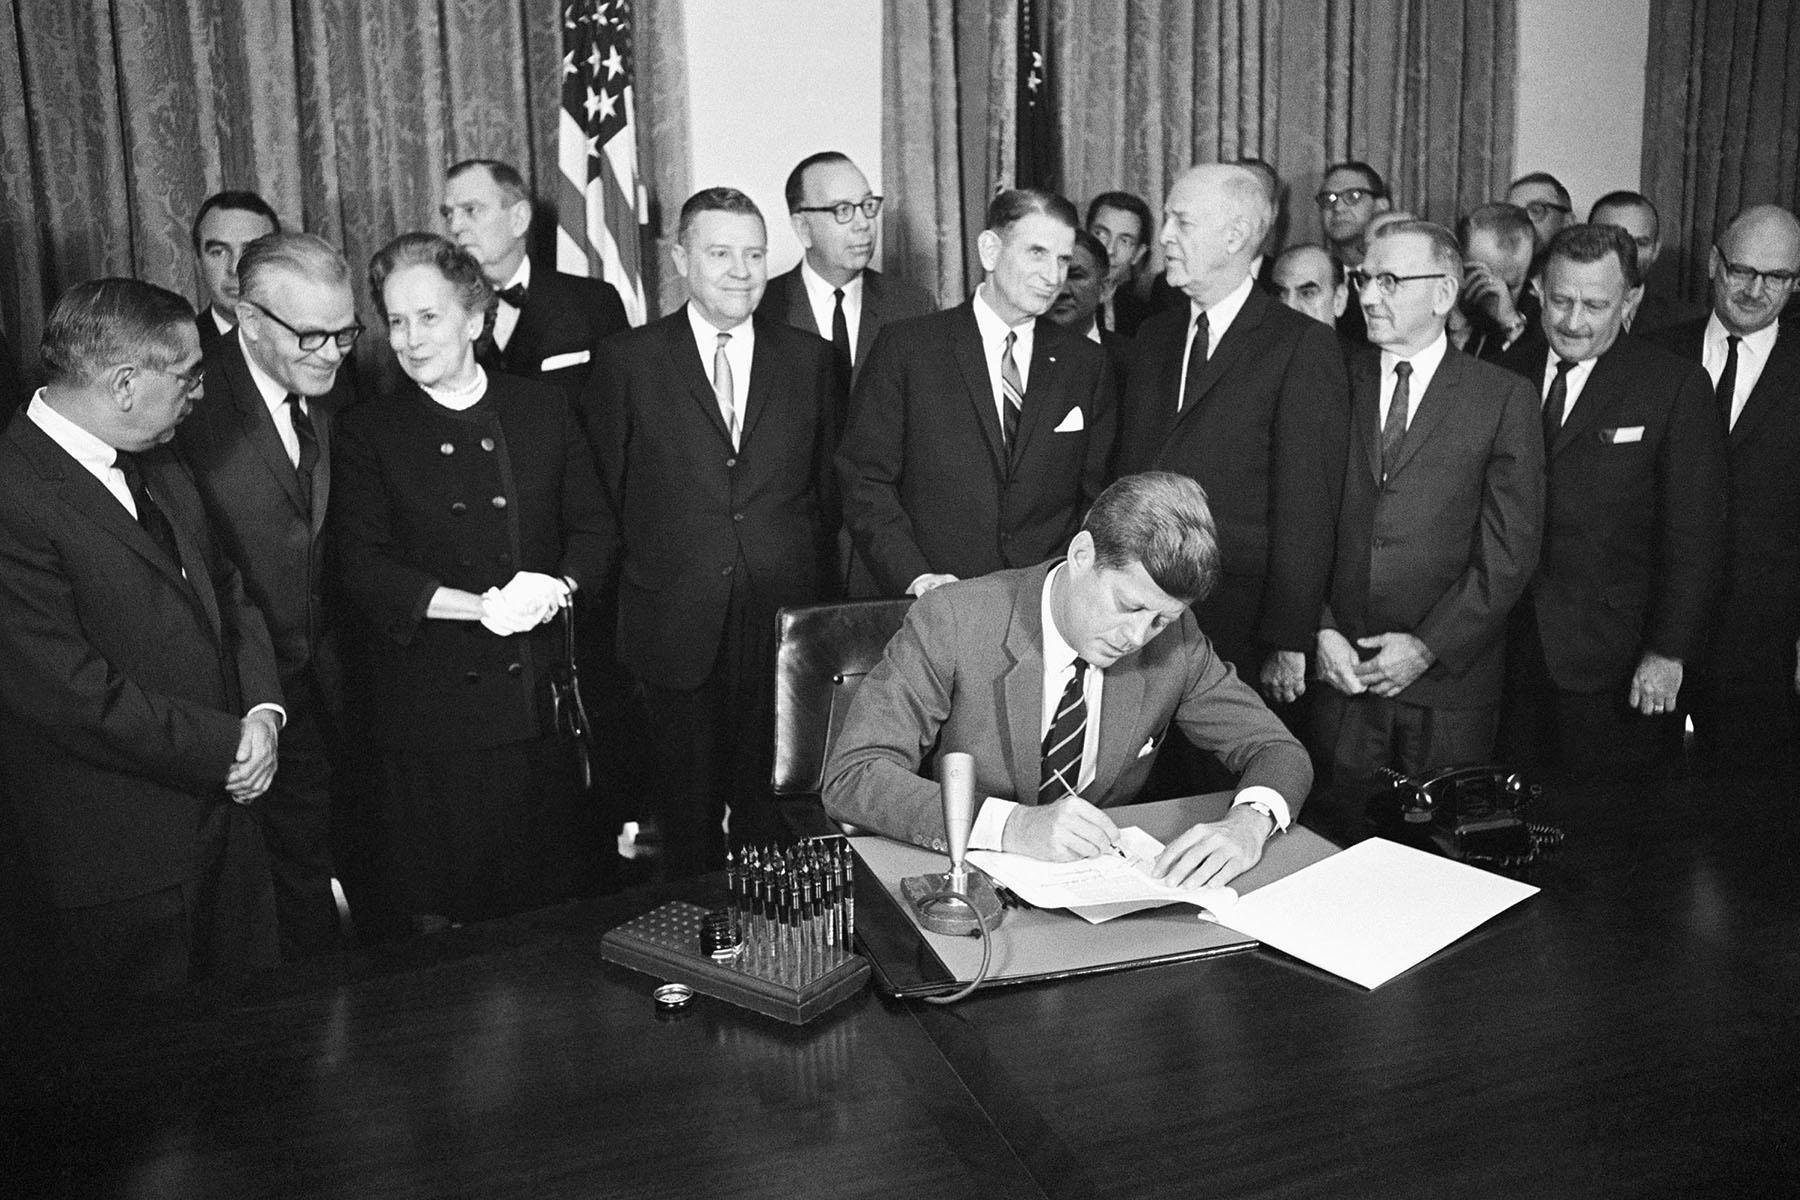 President John F. Kennedy signs a bill for mental health programs at the White House.